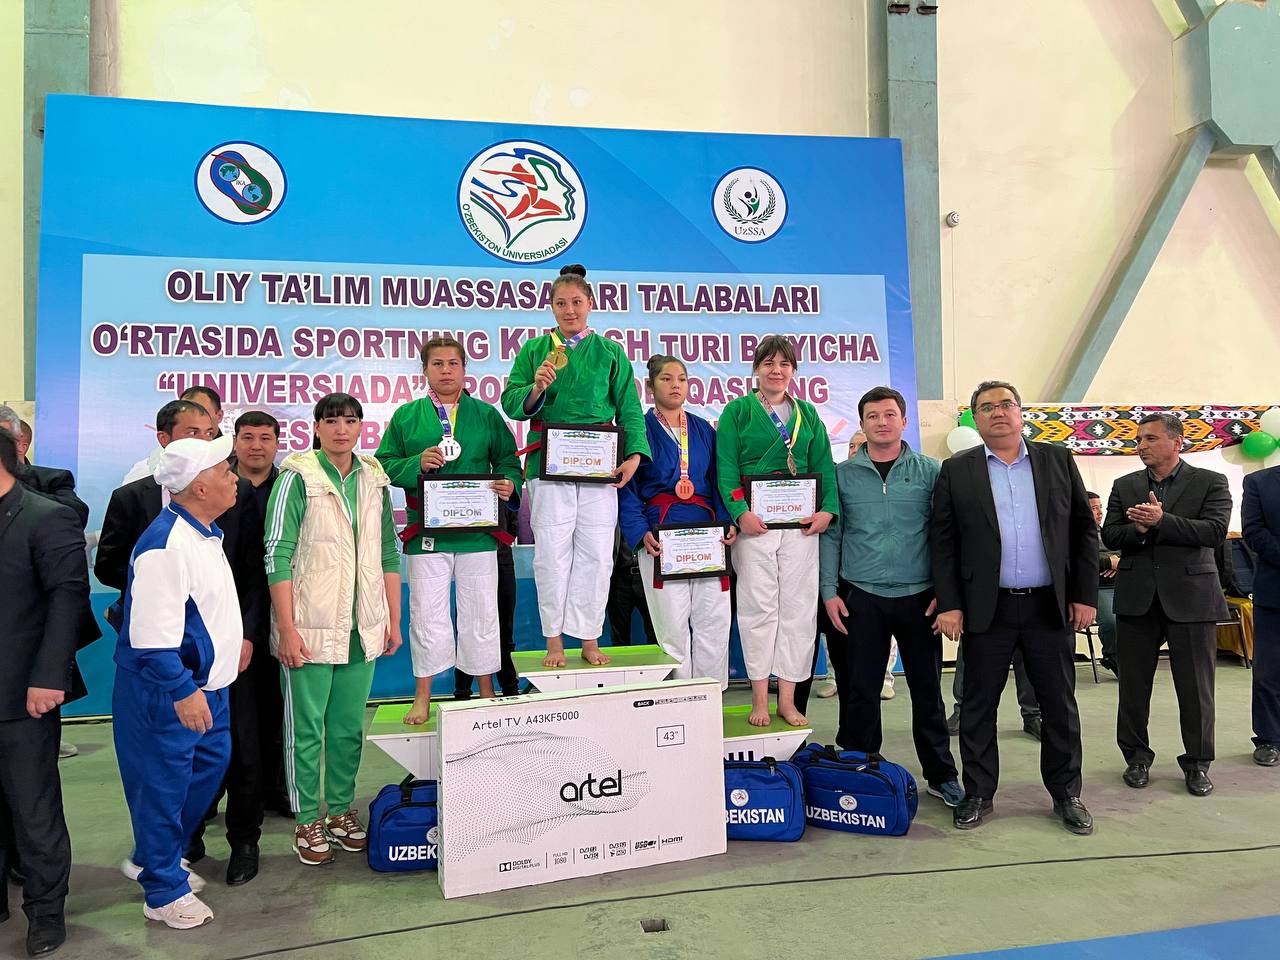 The UrSU team took part in the final of the Universiade in wrestling